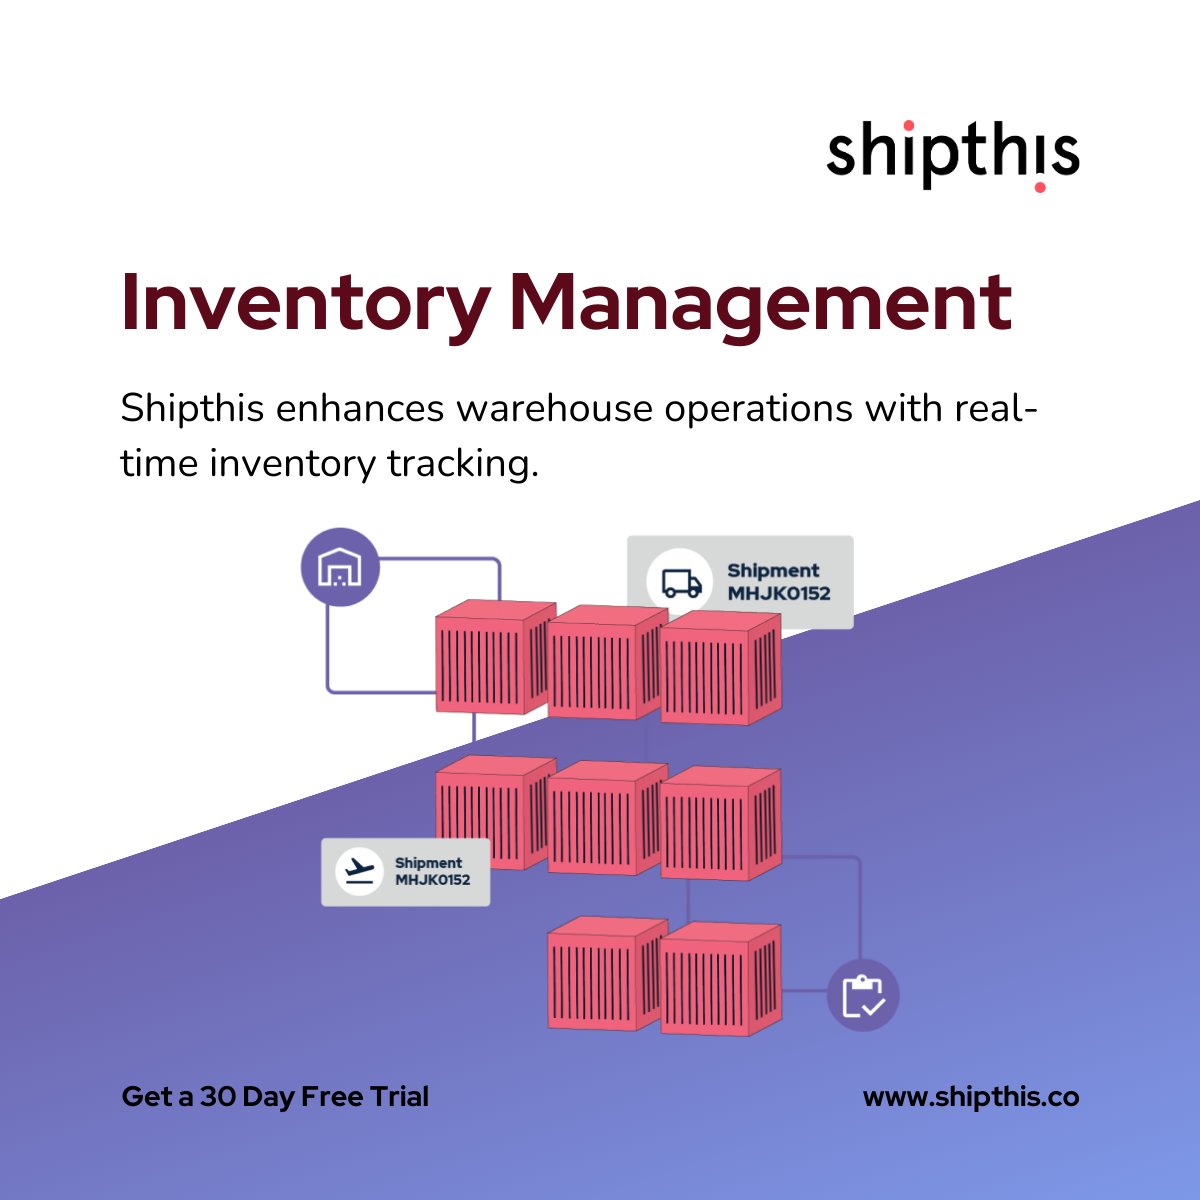 Experience real-time tracking for unparalleled visibility into your inventory. Our comprehensive features, including FIFO, LIFO, and Multi UOM tracking, empower you to master your warehouse operations #Shipthis #WarehouseInnovation #RealTimeTracking #InventoryManagement